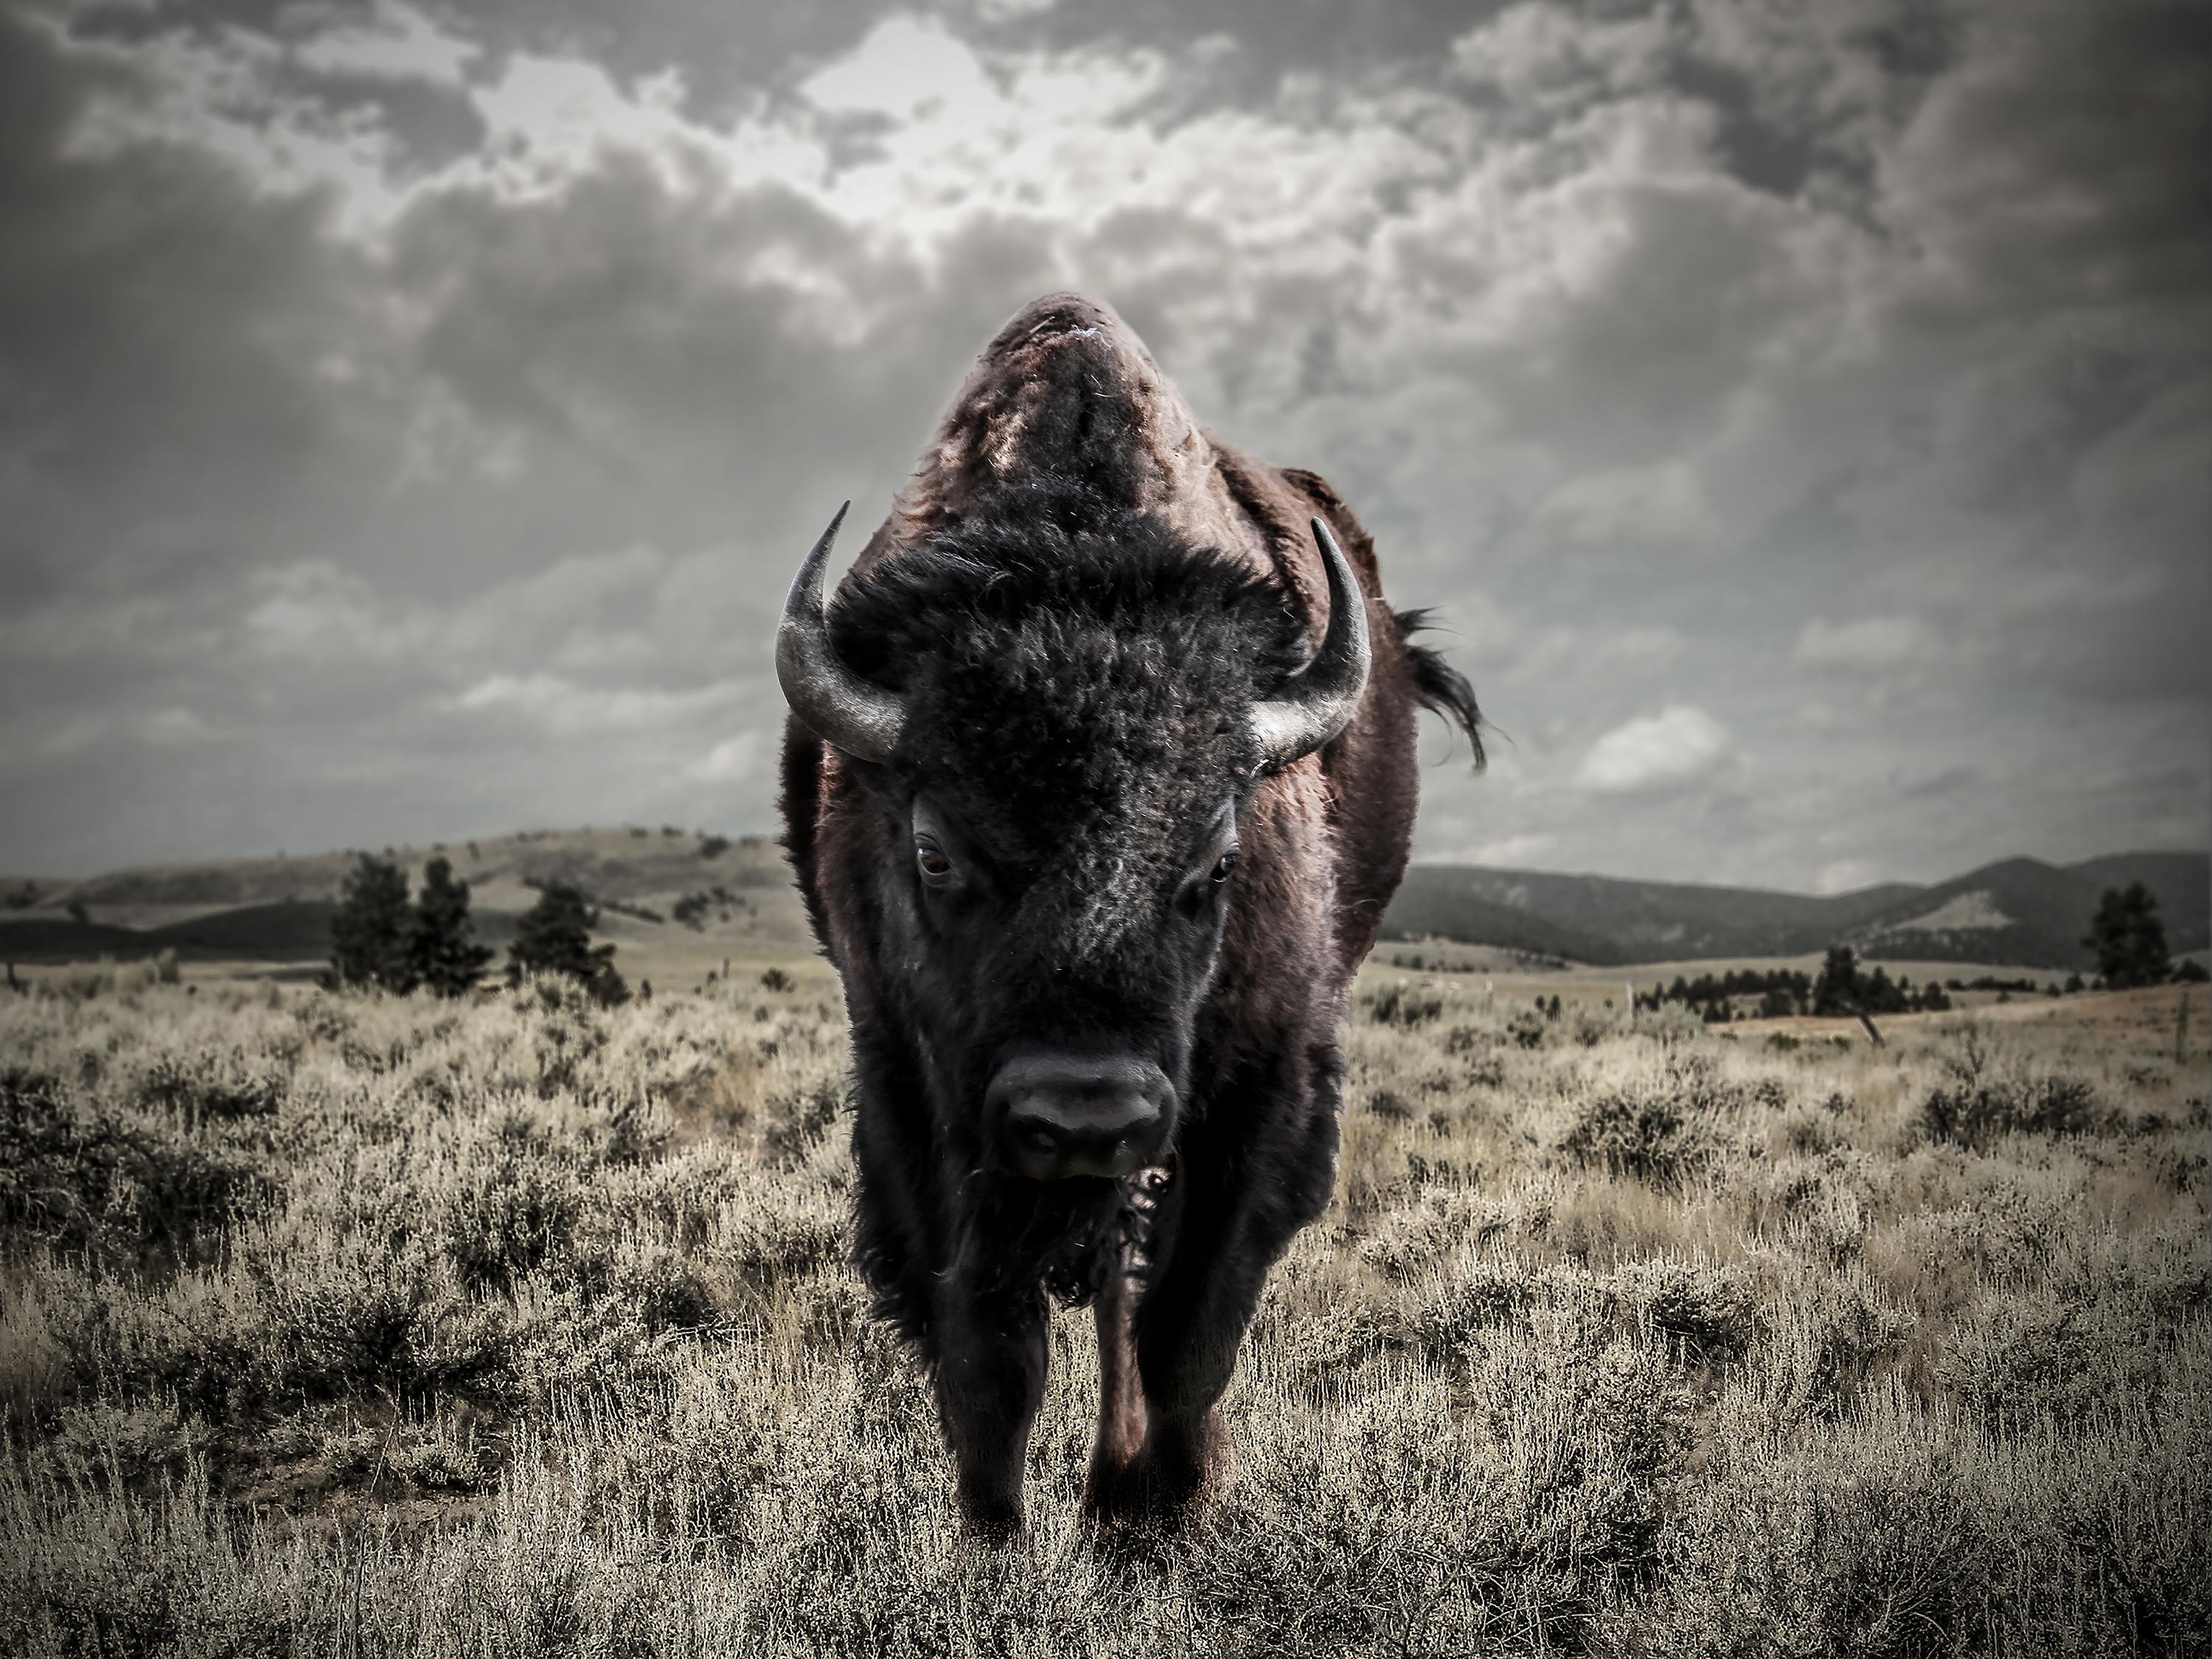 Shane Russeck Animal Print - 'Bison" Photograph of Bison 28x40 -  Photography Unsigned Print Buffalo